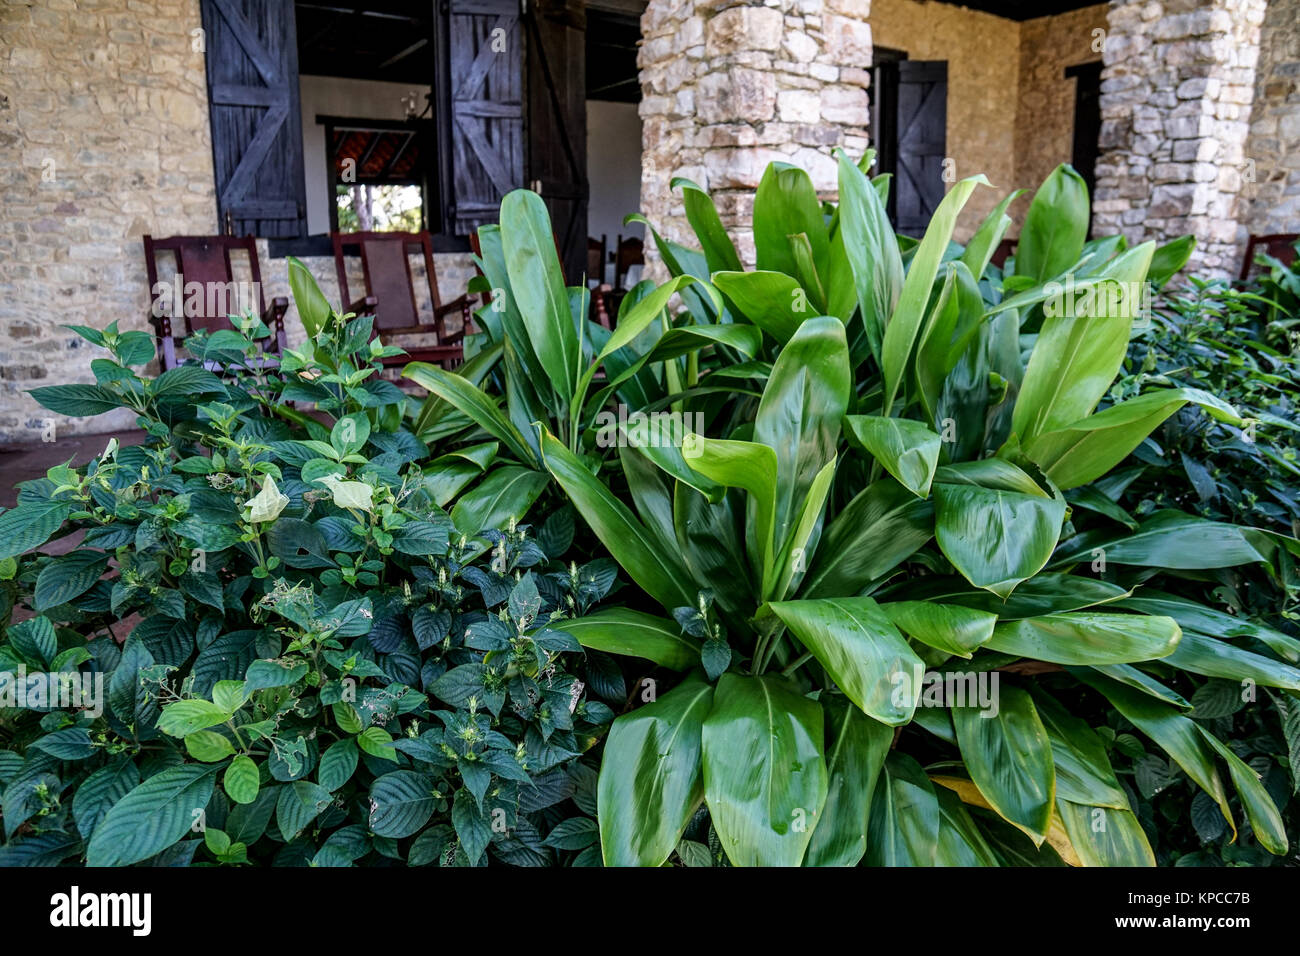 Porch and green plants Stock Photo